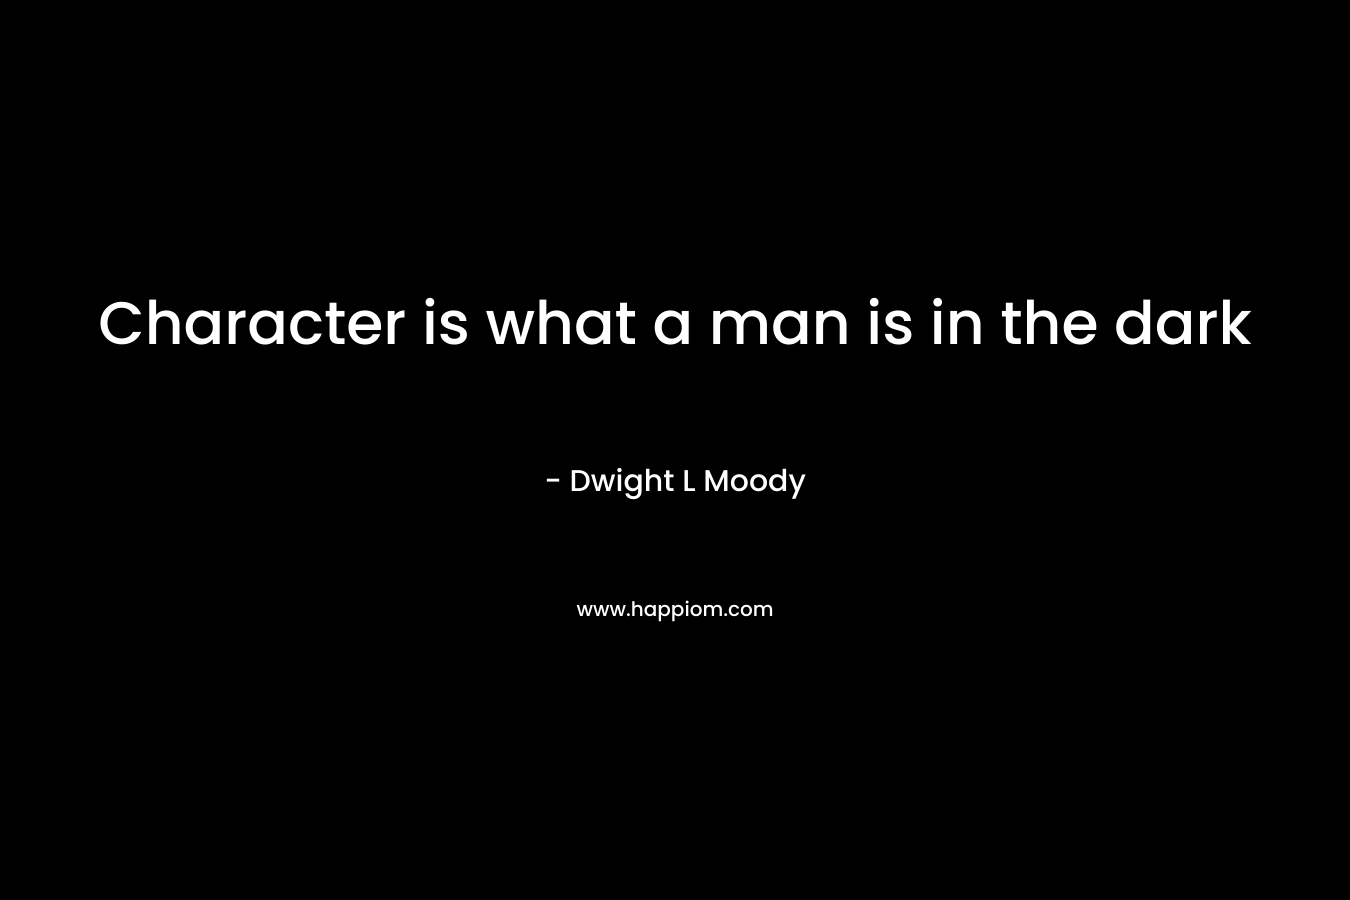 Character is what a man is in the dark